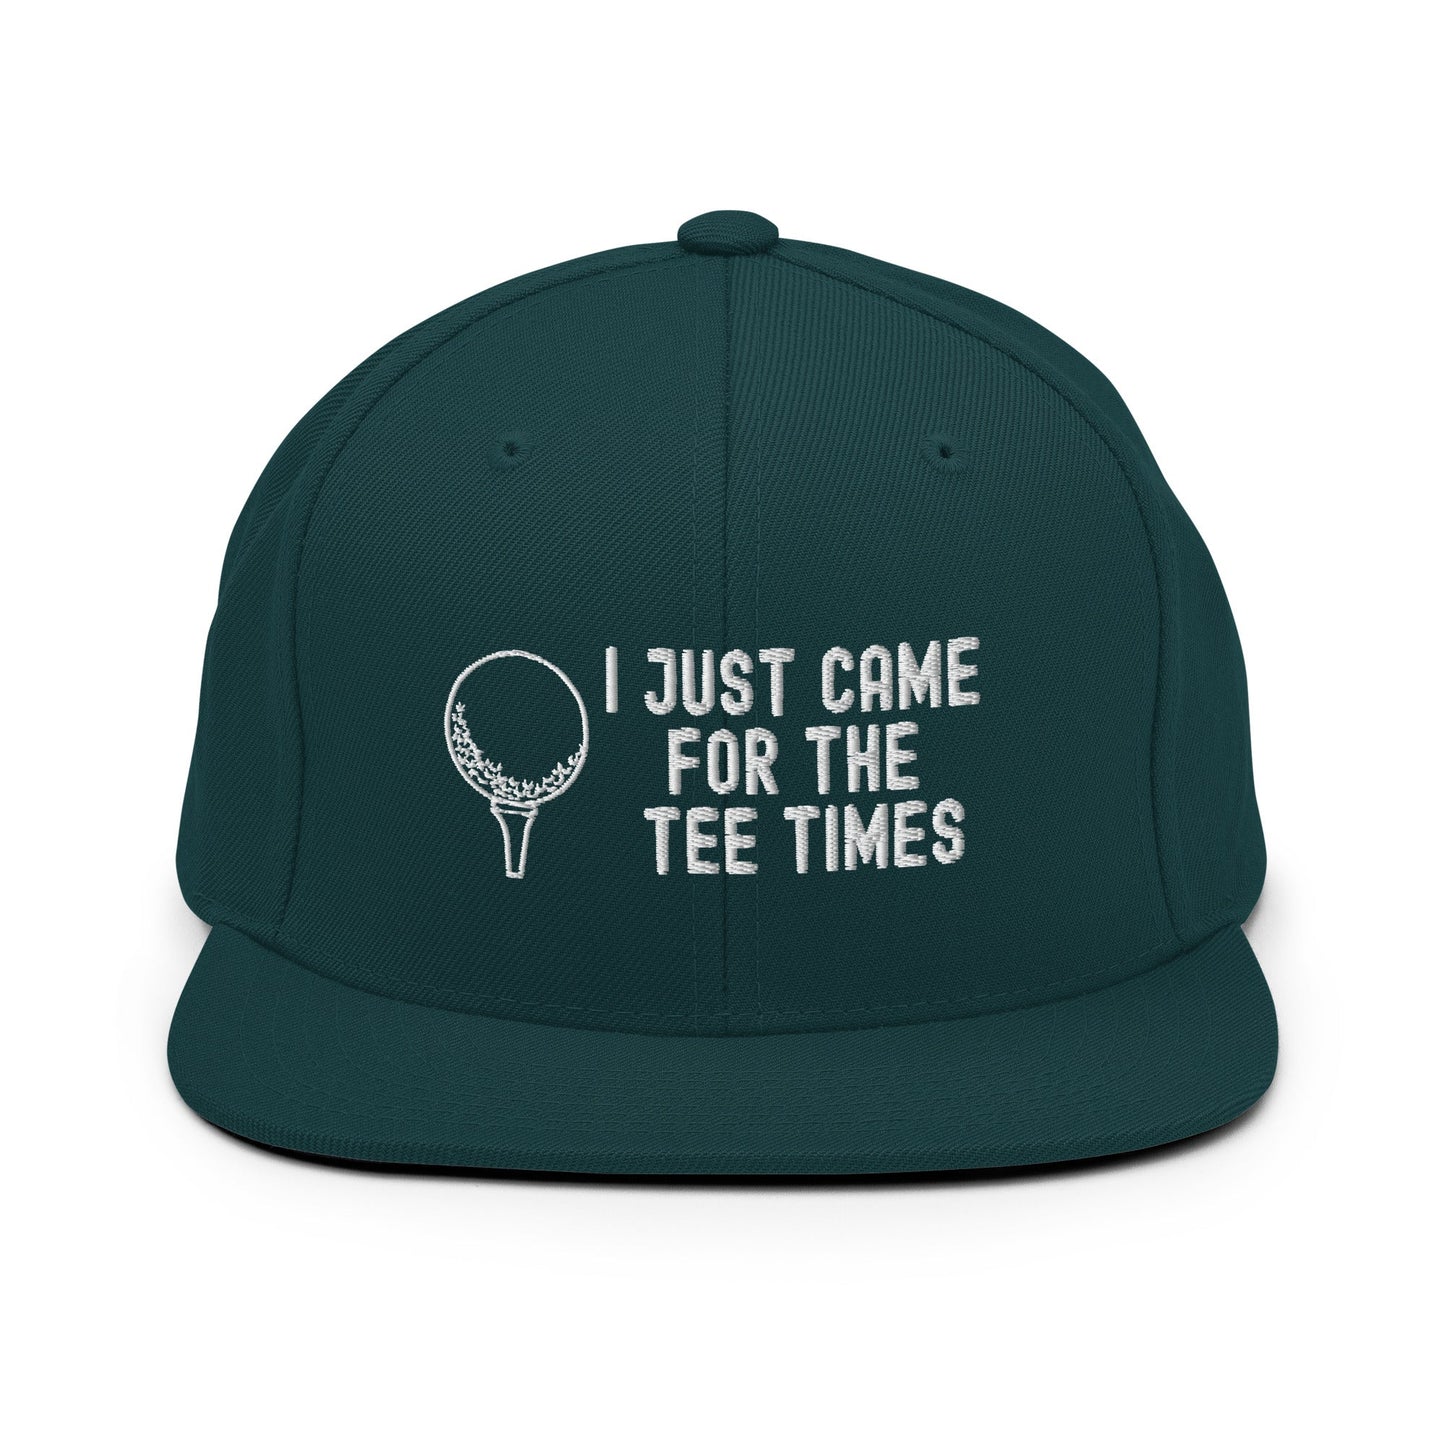 Funny Golfer Gifts  Snapback Hat Spruce I Just Came For The Tee Times Snapback Hat